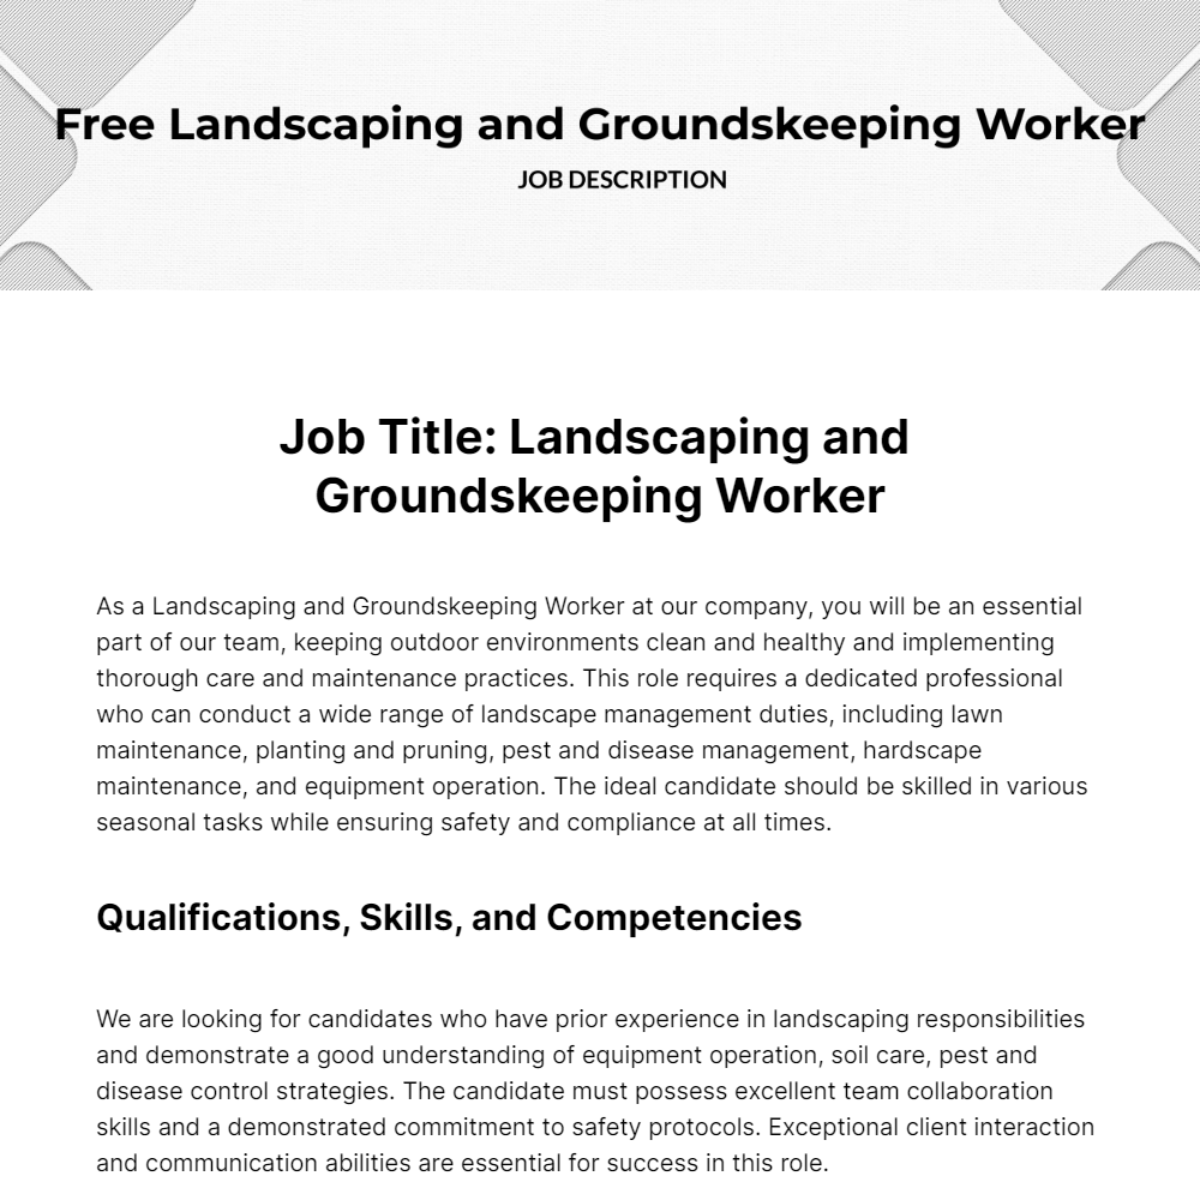 Landscaping and Groundskeeping Workers Job Description Template